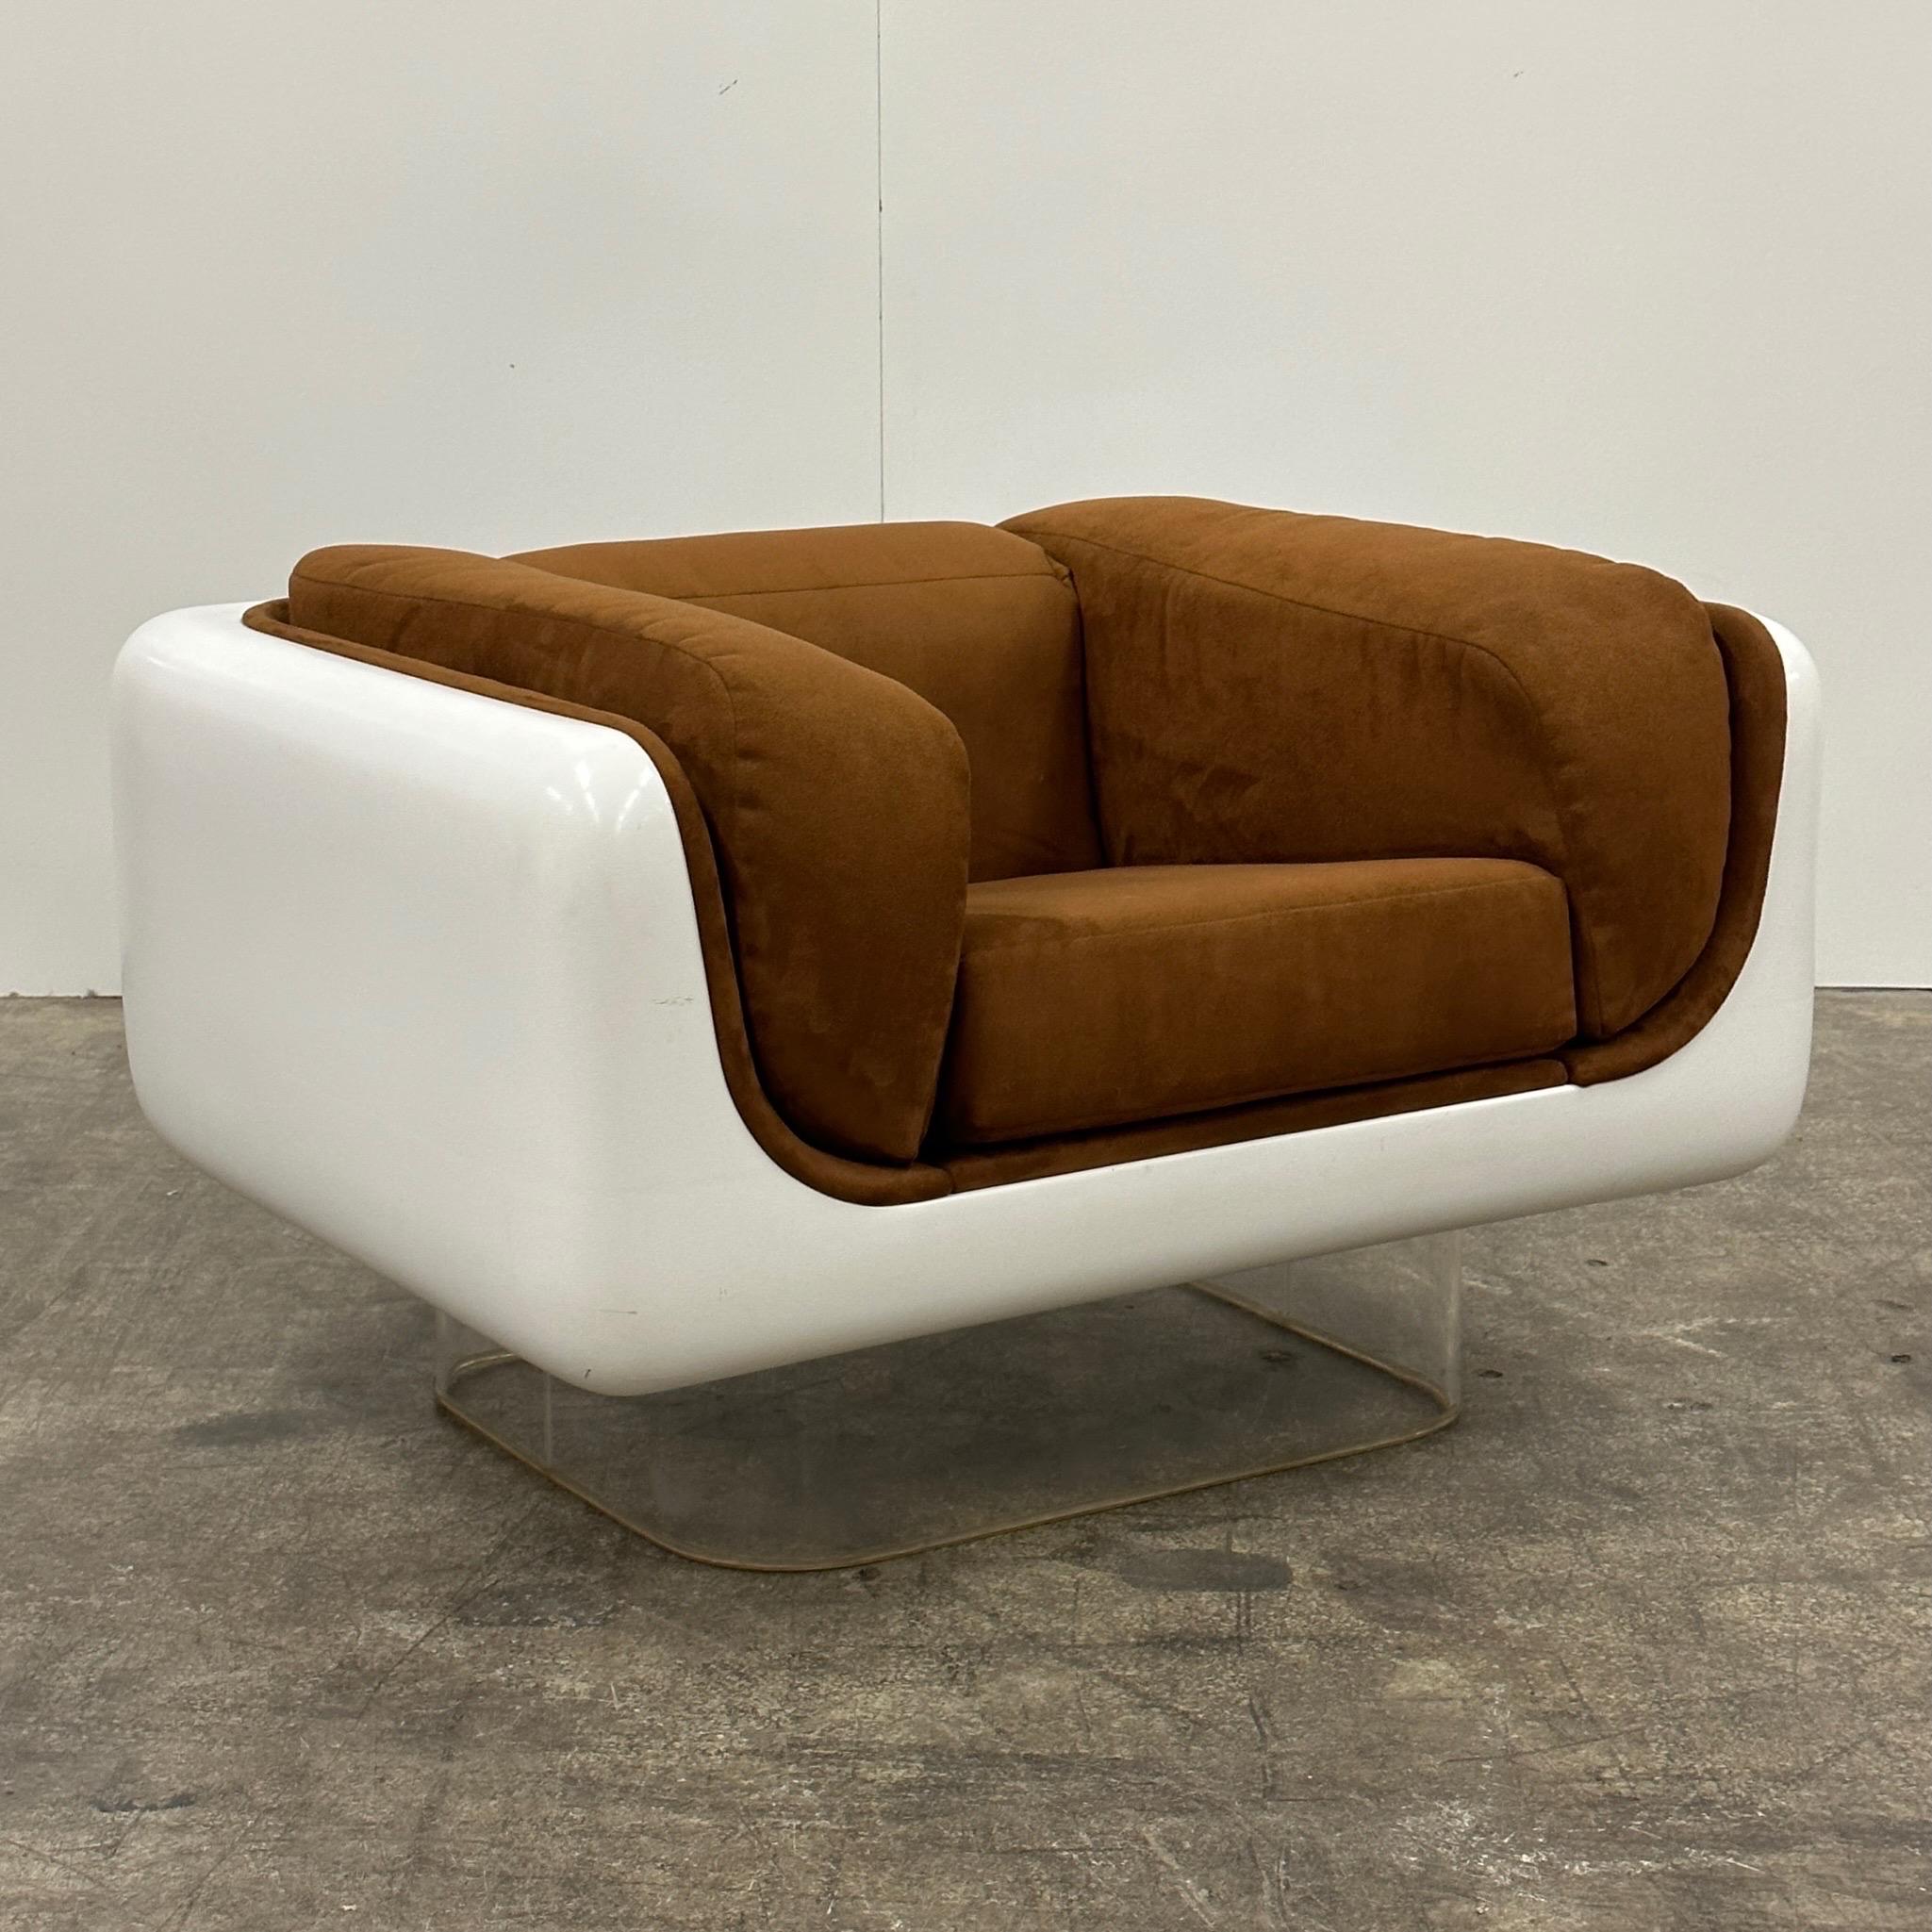 Late 20th Century Soft Seating Lounge Chair by William Andrus for Steelcase For Sale